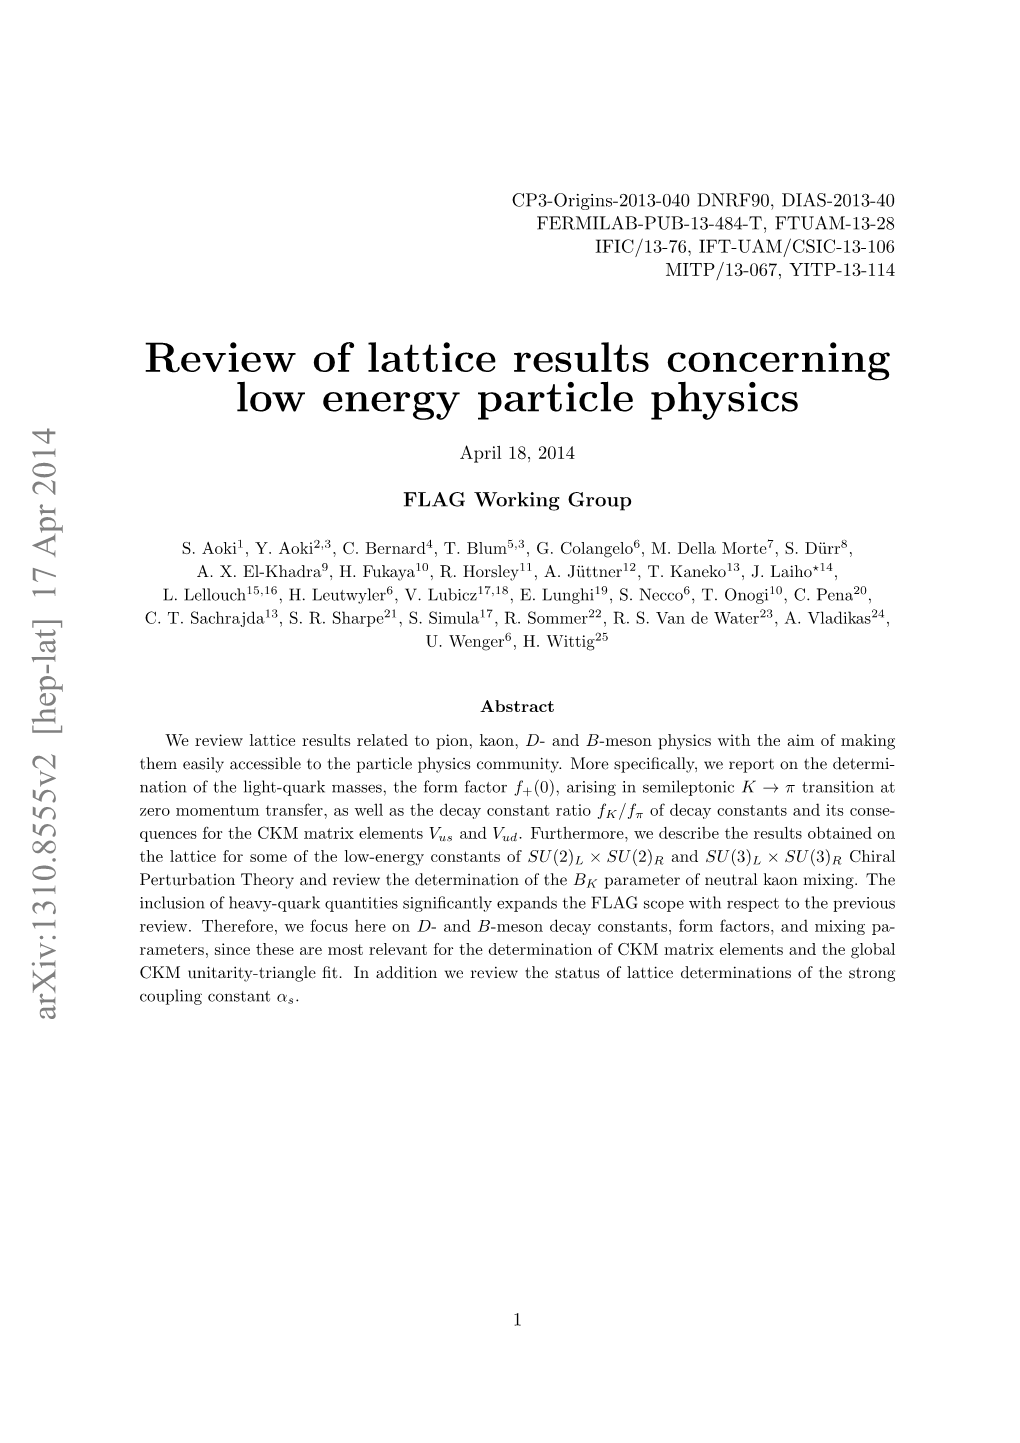 Review of Lattice Results Concerning Low Energy Particle Physics, Eur.Phys.J